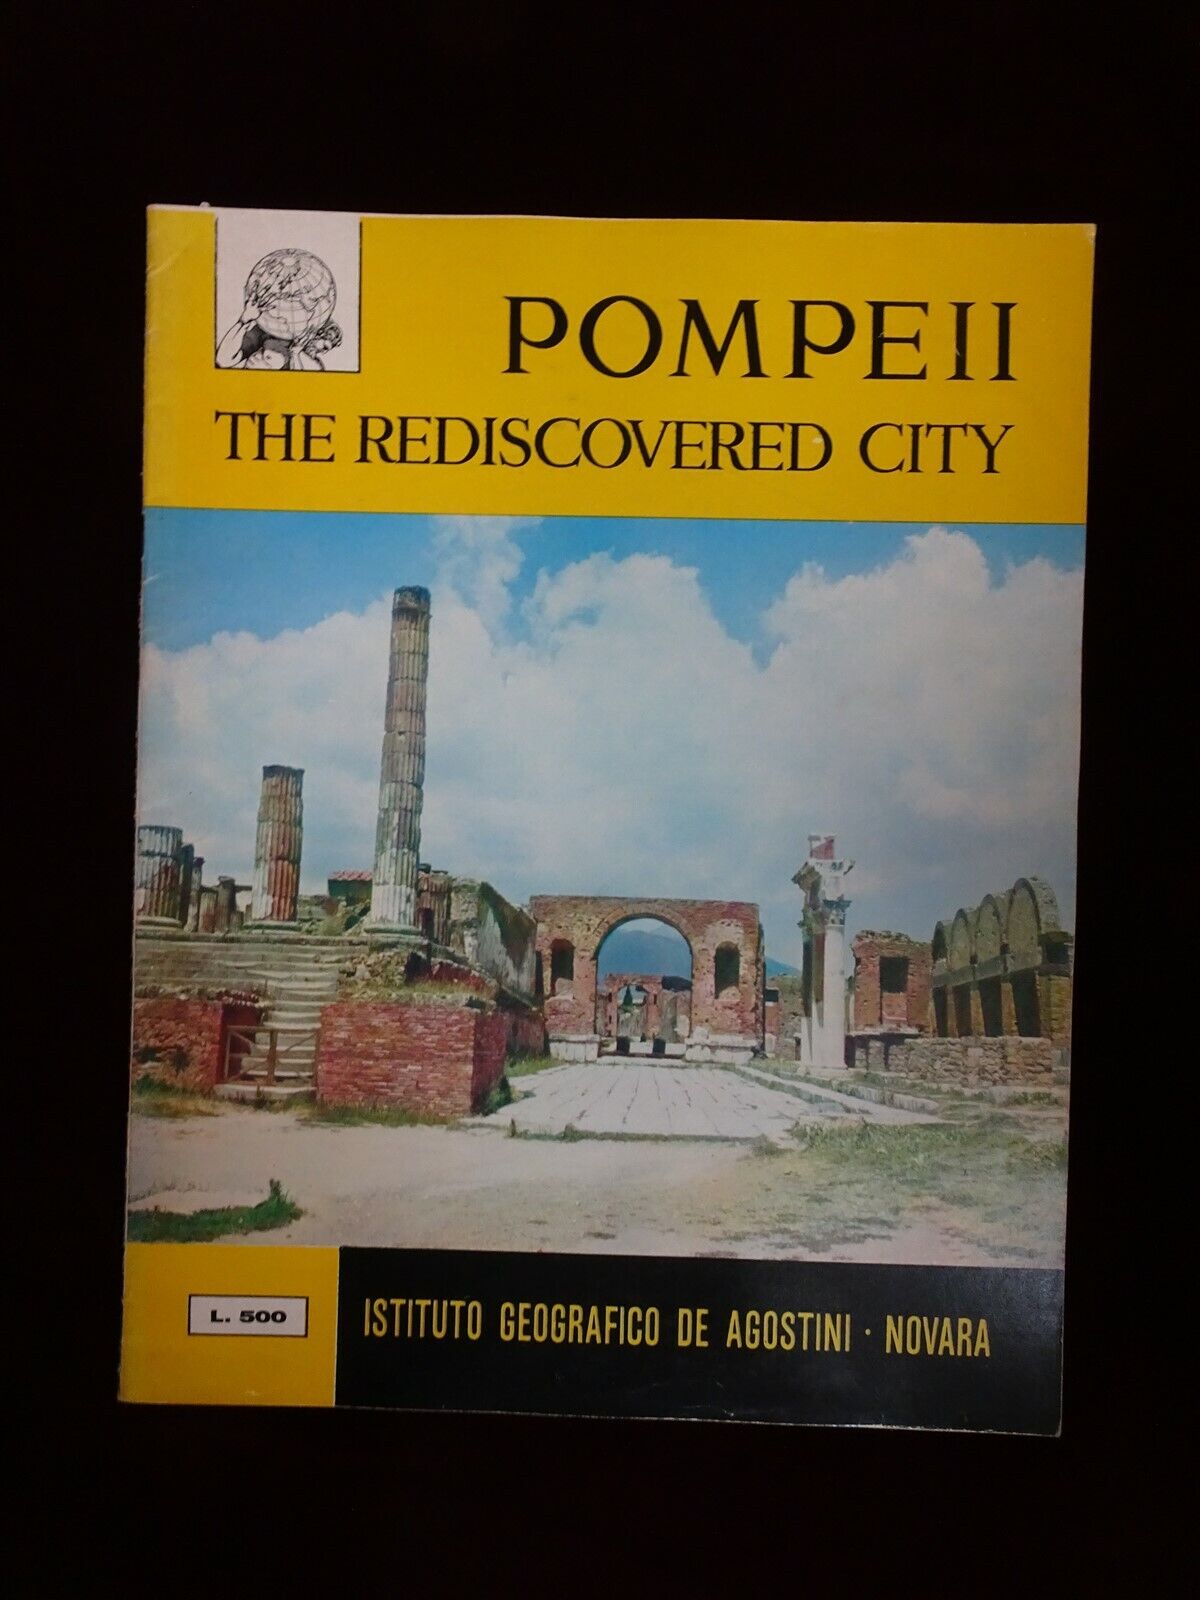 Vintage 1970 Archaeological Travel Guide to Pompeii The Rediscovered City, Italy